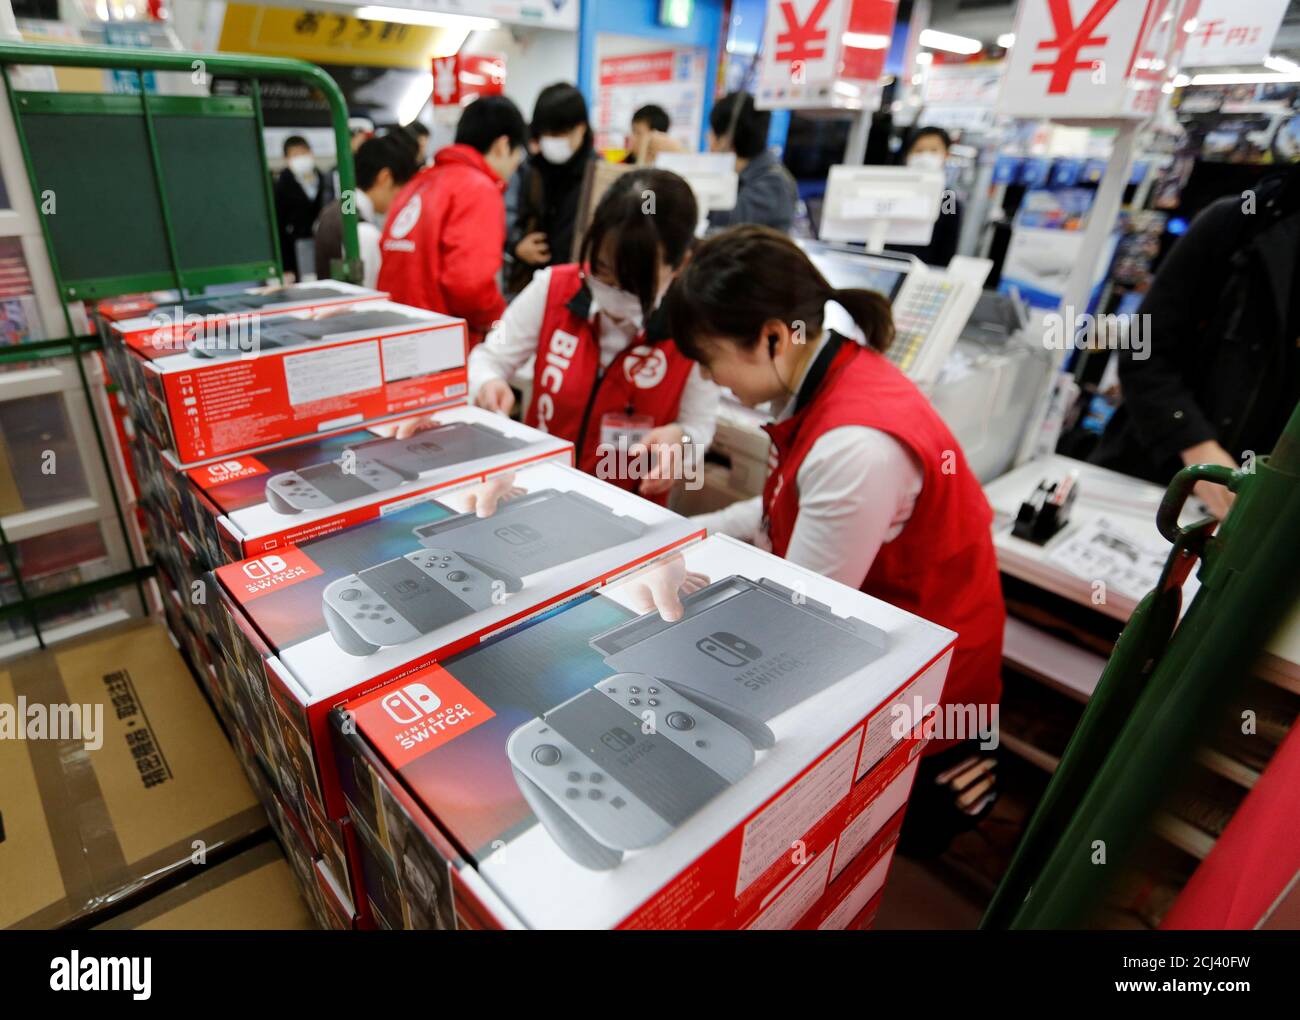 Sales staff work behind Nintendo Switch game consoles at an electronics  store in Tokyo, Japan March 3, 2017. REUTERS/Toru Hanai Stock Photo - Alamy